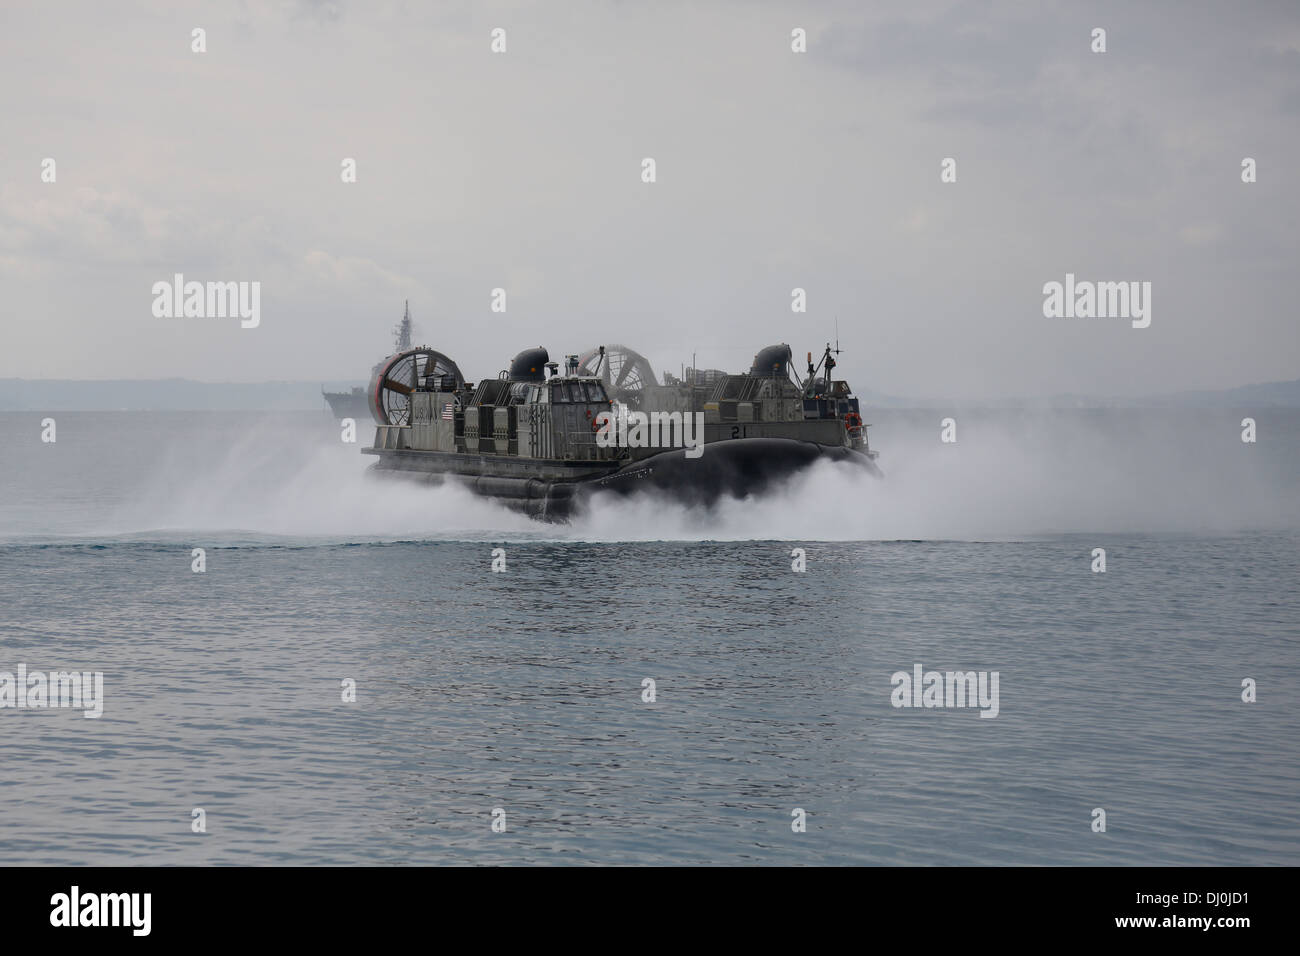 U.S. Sailors with the 31st Marine Expeditionary Unit, III Marine Expeditionary Force, use a Landing Craft Air Cushion to load gear and equipment onto the USS Germantown at U.S. Navy White Beach Port Facility, Okinawa, Japan, Nov. 16, 2013. The Marines and Stock Photo